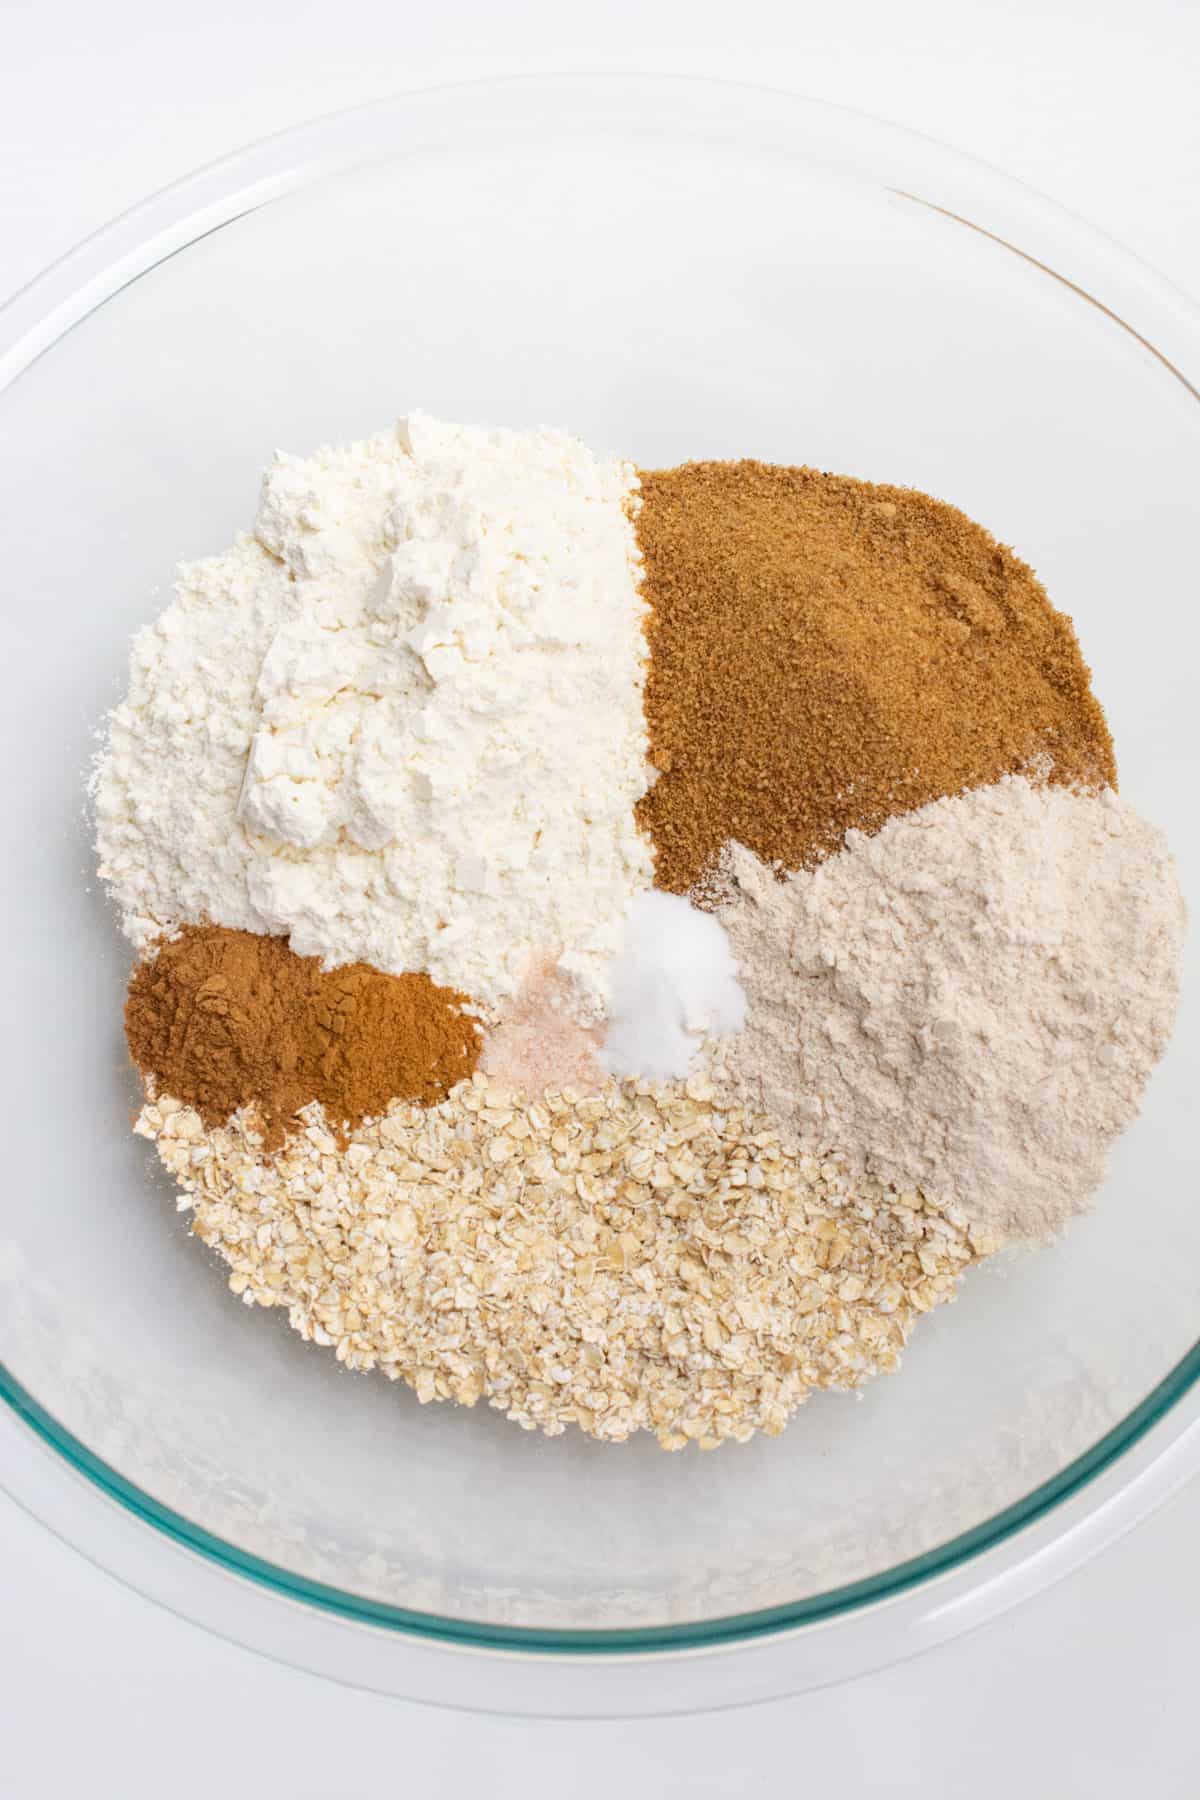 Dry oatmeal cookie ingredients in a glass bowl.